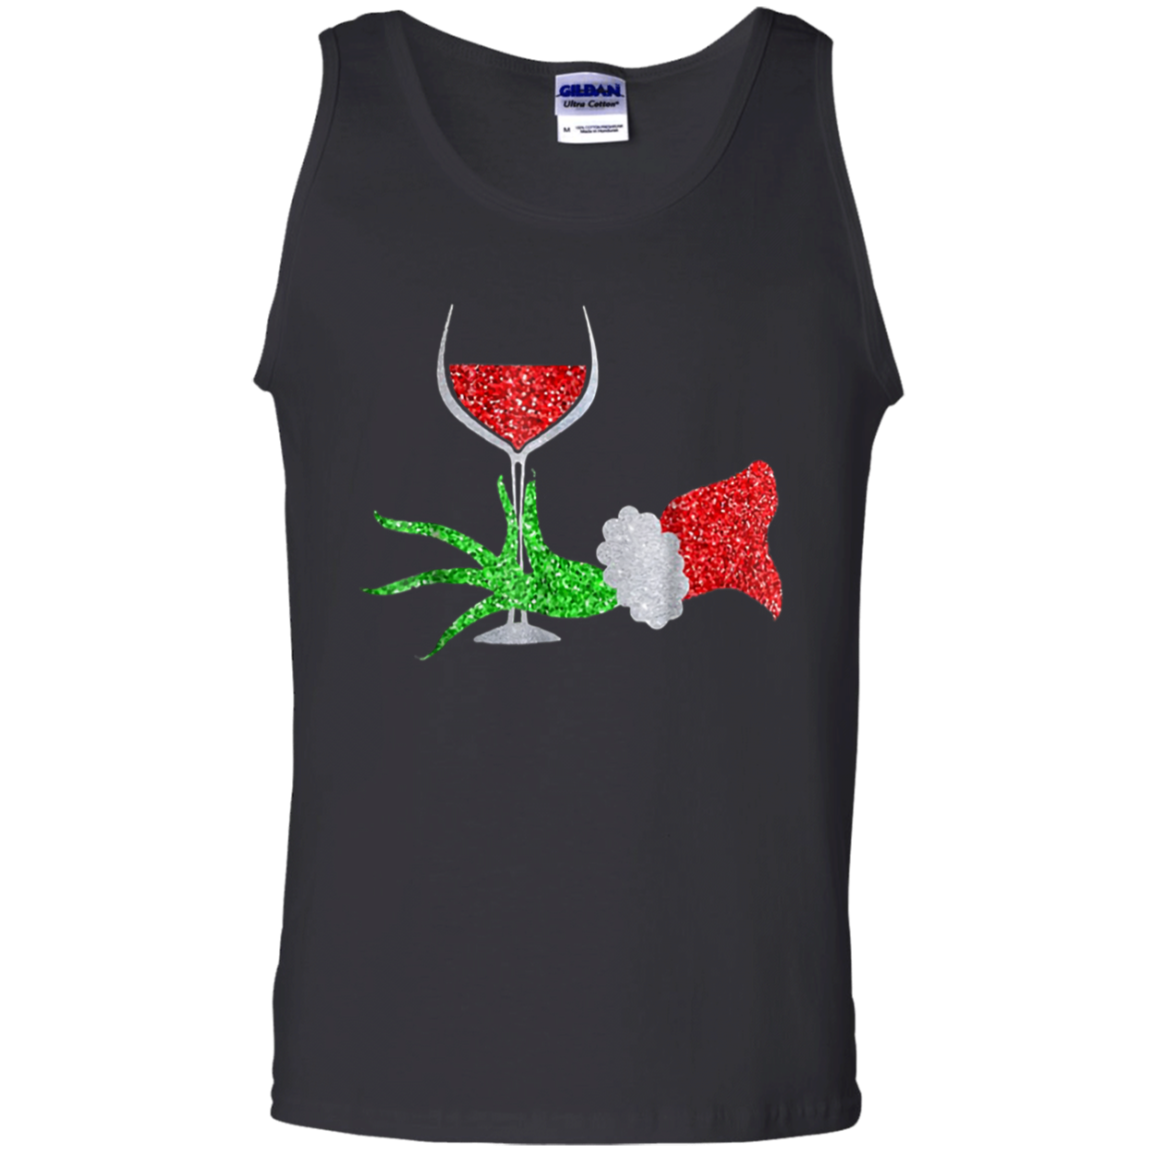 Grinch Hand Holding A Glass Of Wine Christmas Shirt G220 Tank Top